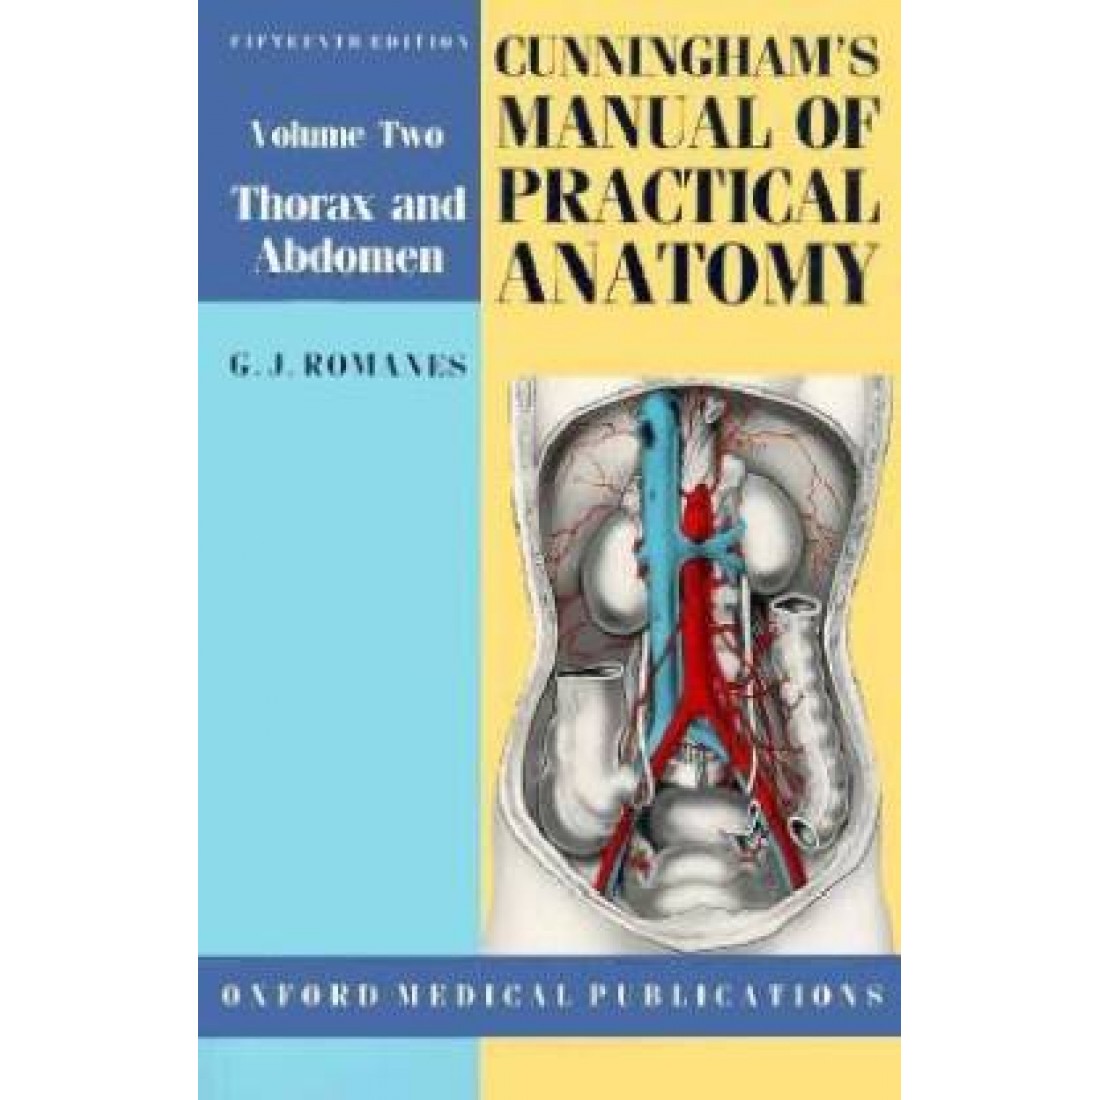 Cunningham S Manual Of Practical Anatomy Volume Ii Thorax And Abdomen By Romanes